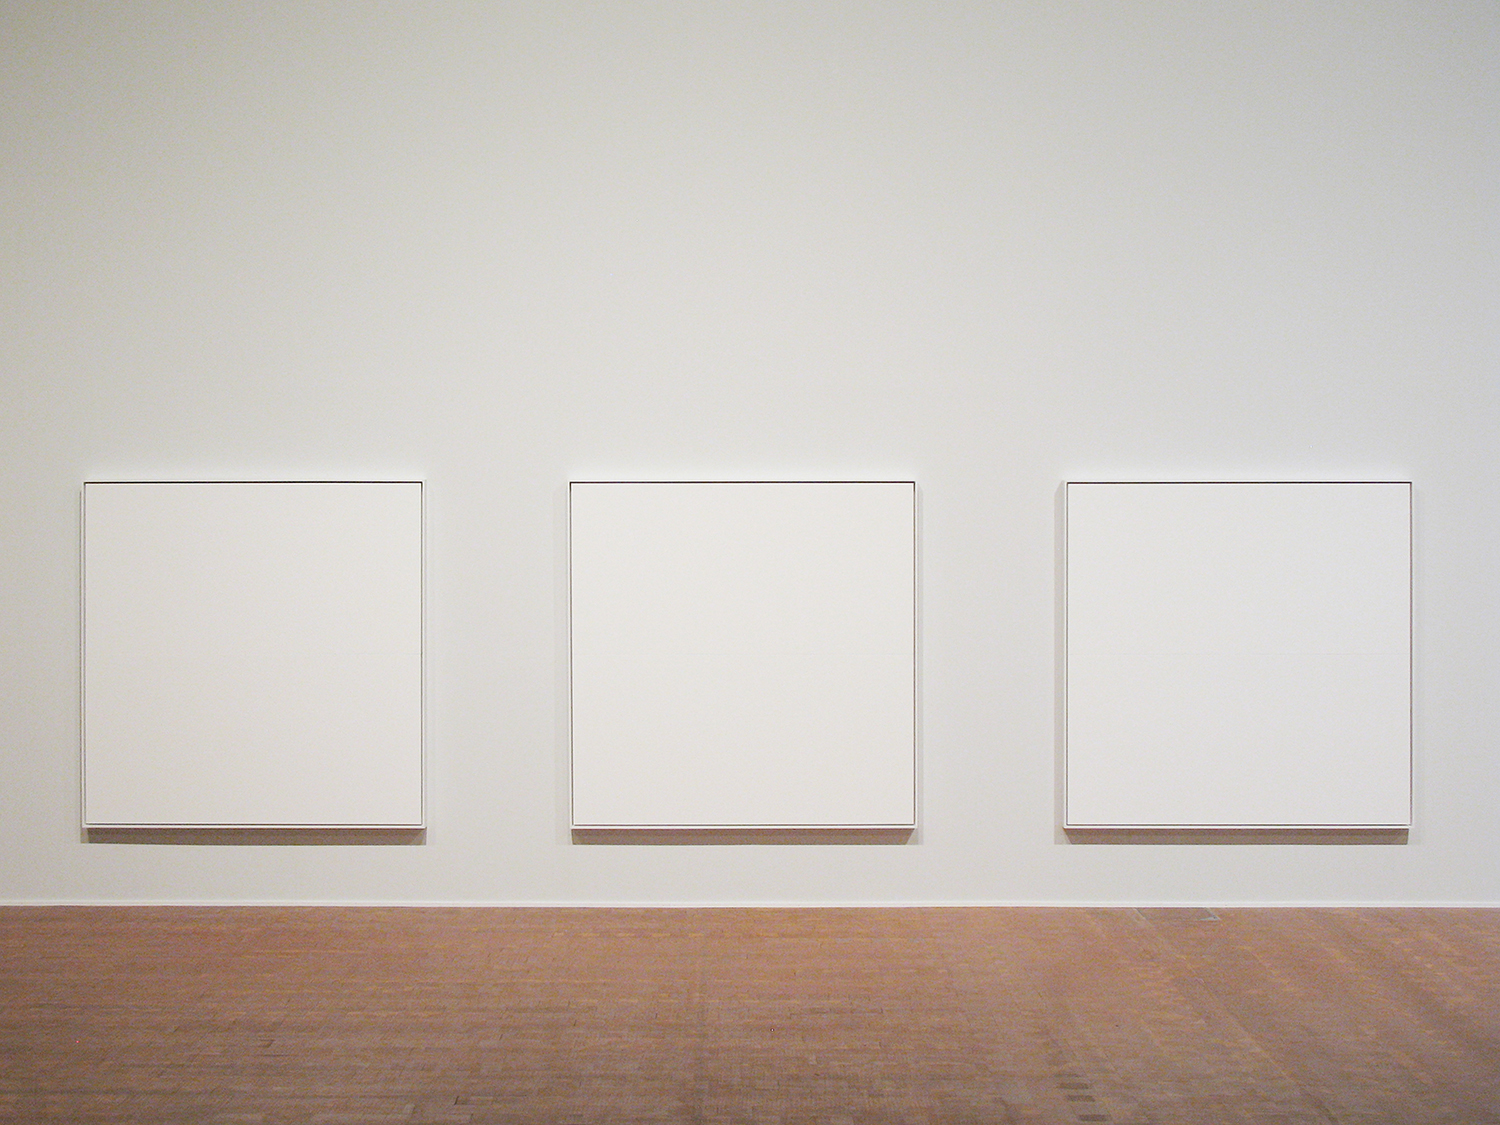 Untitled 2010<br>Acrylic, japanese paper on Honeycomb board<br>124.4 x 124.5 x 5 cm each (set of 18 pieces)